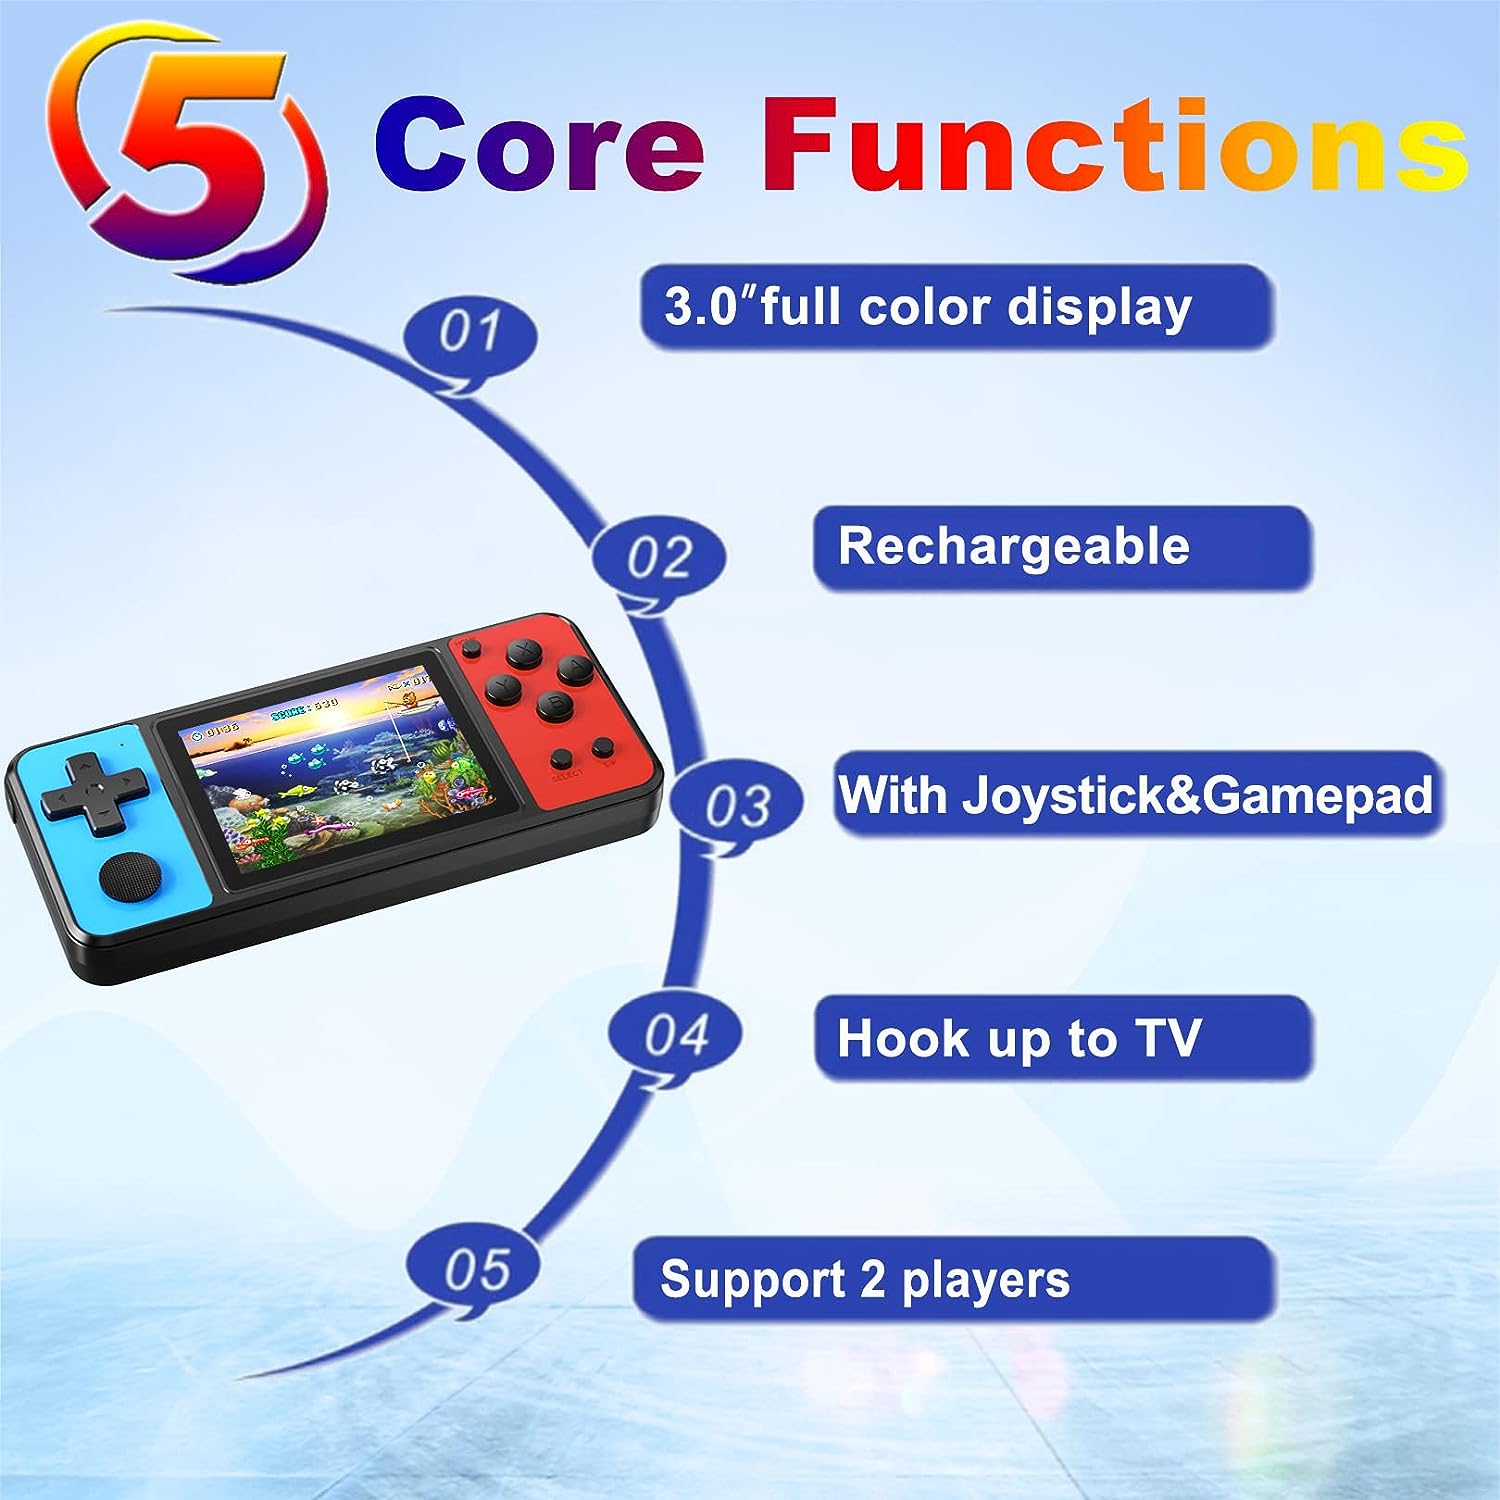 Great Boy Handheld Game Console for Kids Aldults Preloaded 270 Classic Retro Games with 3.0'' Color Display and Gamepad Rechargeable Arcade Gaming Player (Black)